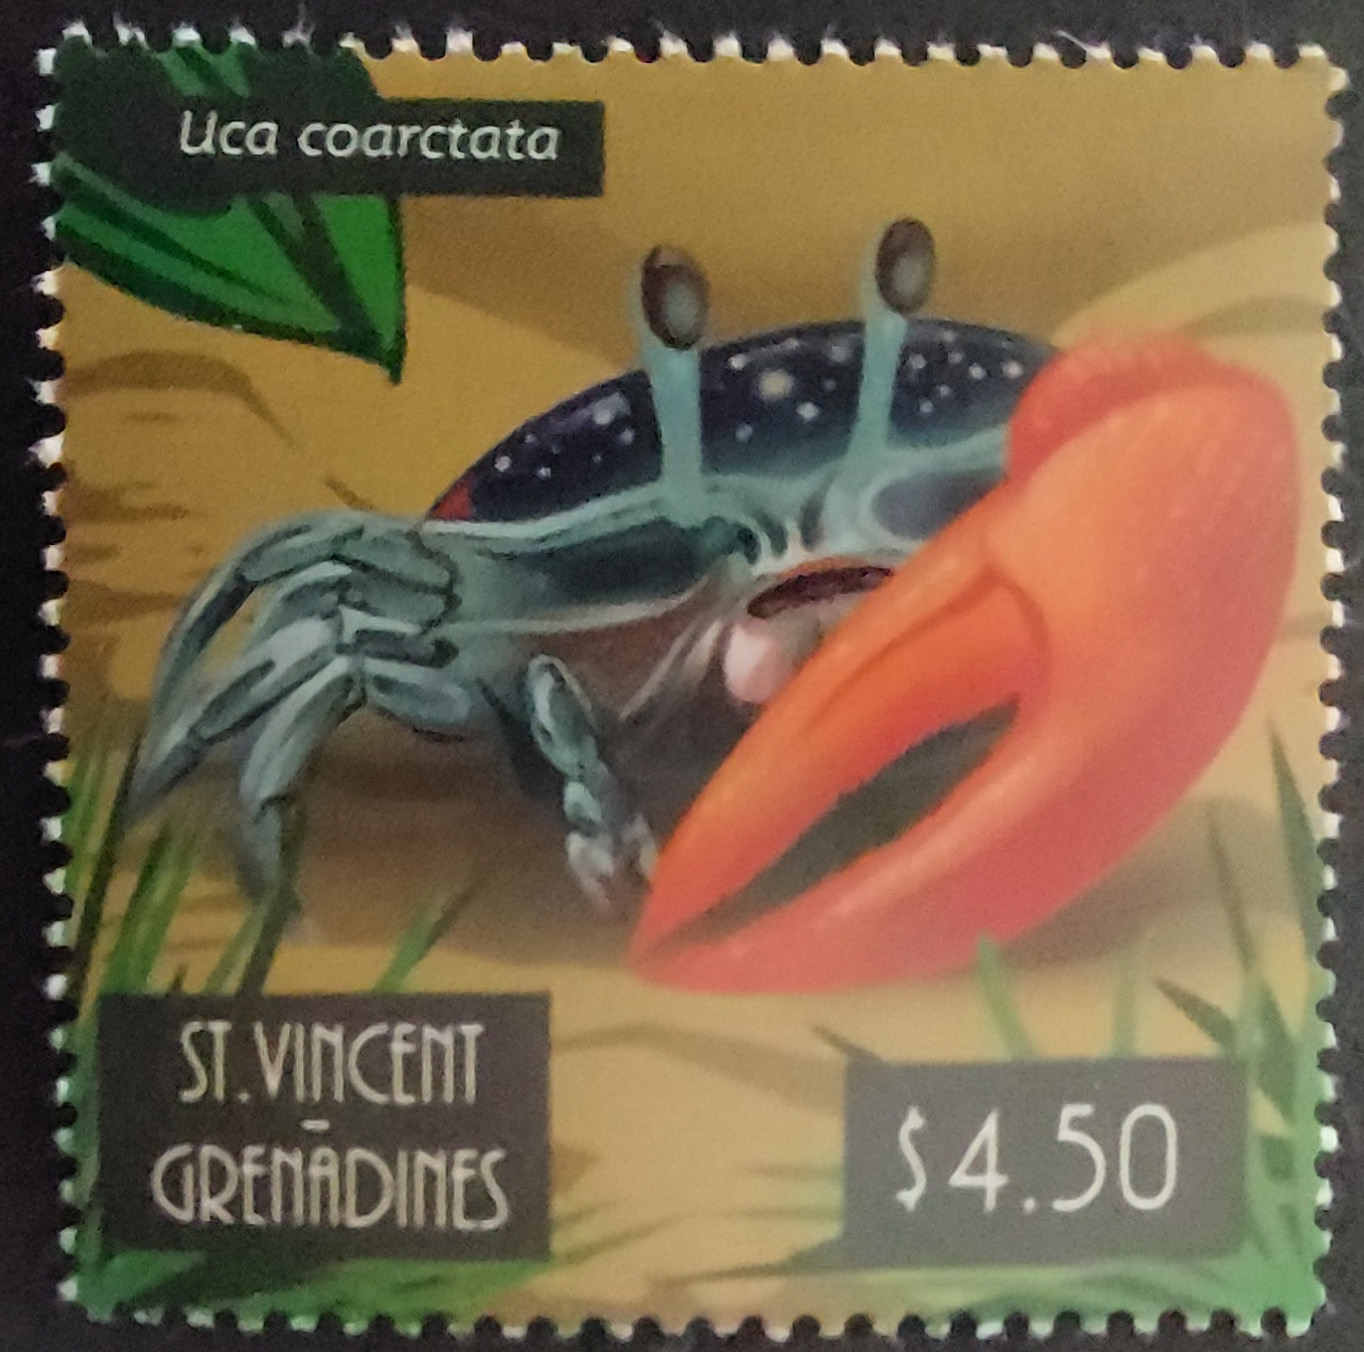 Postage Stamp: St. Vincent and the Grenadines (2021) image